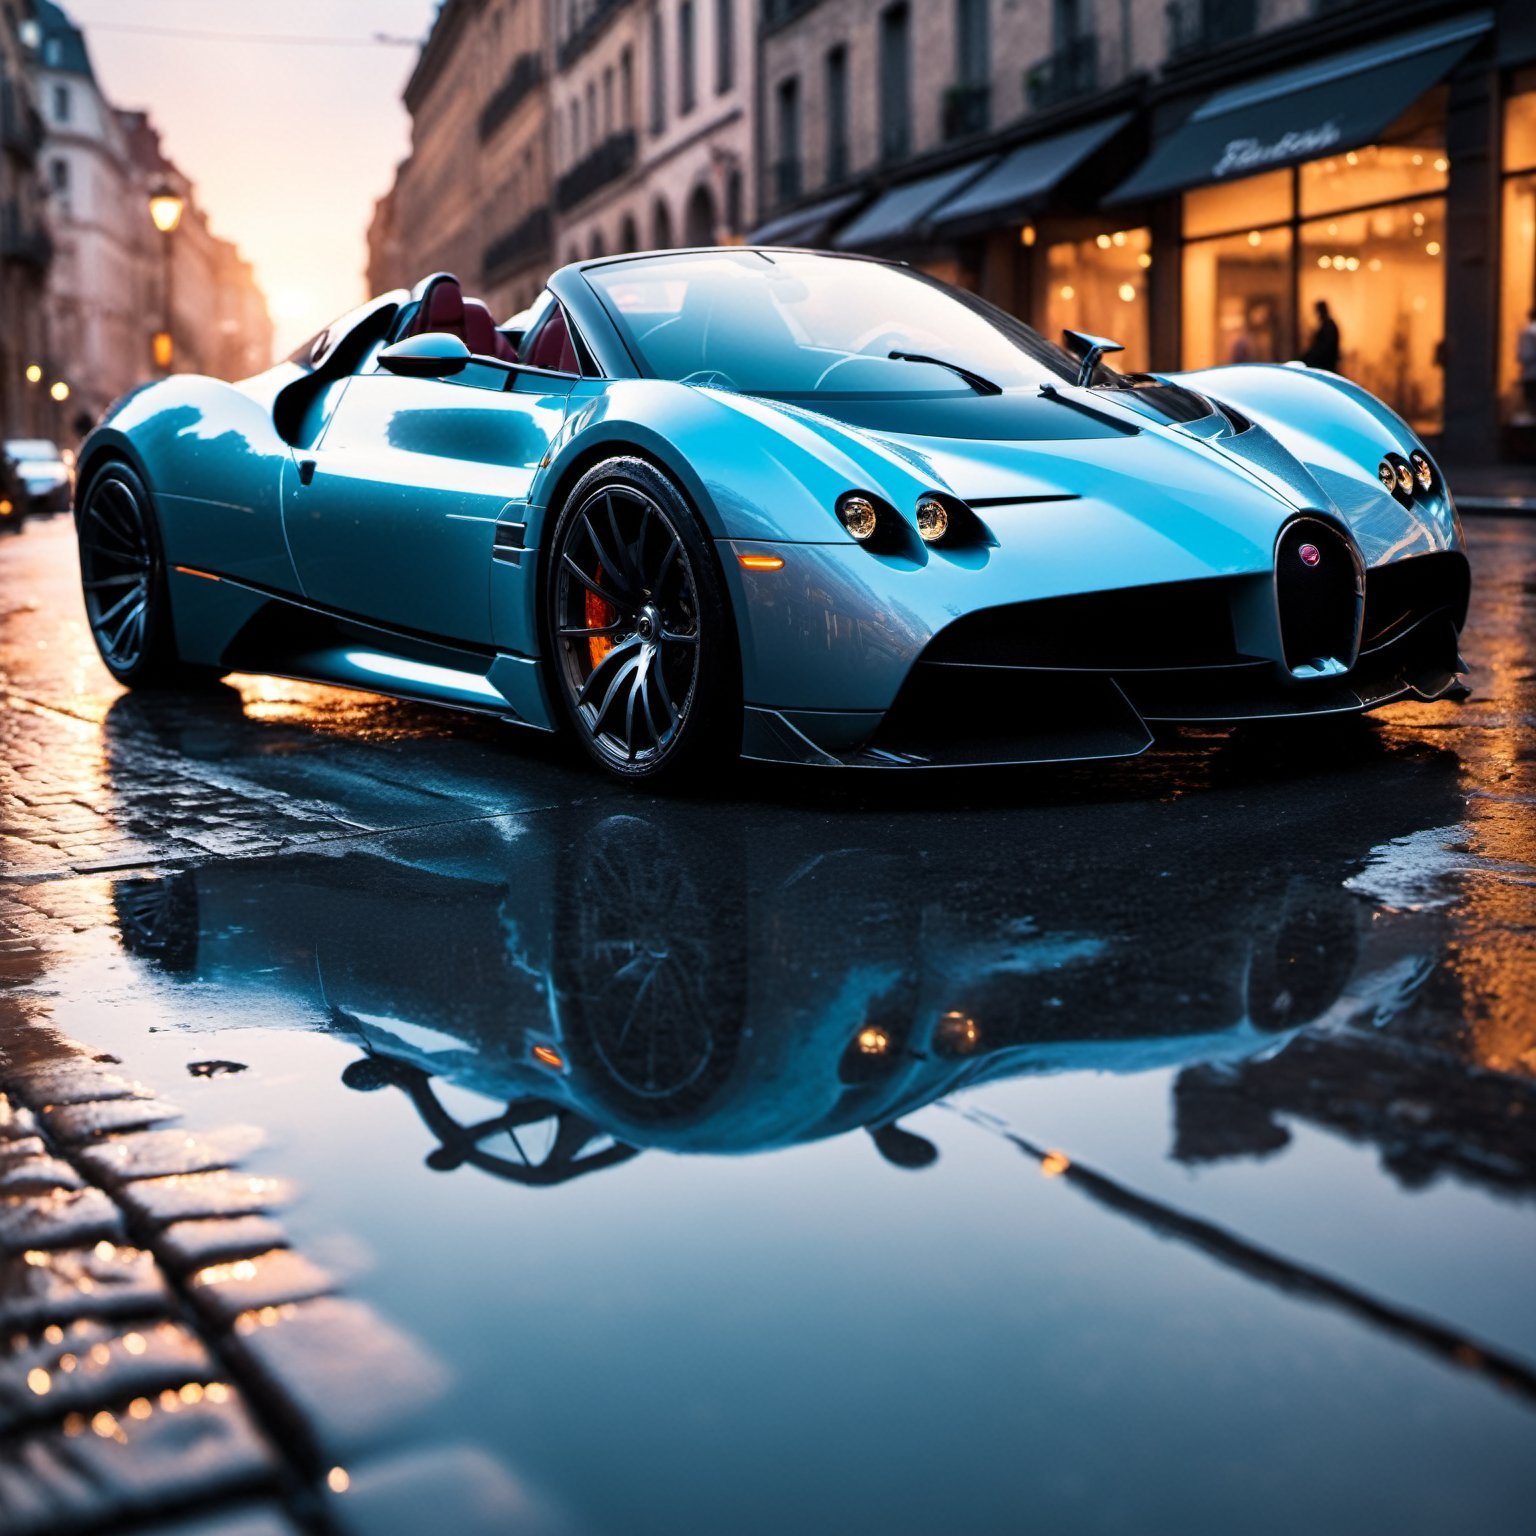 a photograph of a futuristic concept sports car convertible in wet cyberpunk city at sunset, backlit, slick, smooth, Bugati, wet cobblestone street, (cinematic lighting:1.3), Pagani, soft cinematic light, low shot from street level, adobe lightroom, photolab, hdr, immense detail, extreme detail, photorealism, professional photography, shiny, droplet splashes, depth of field